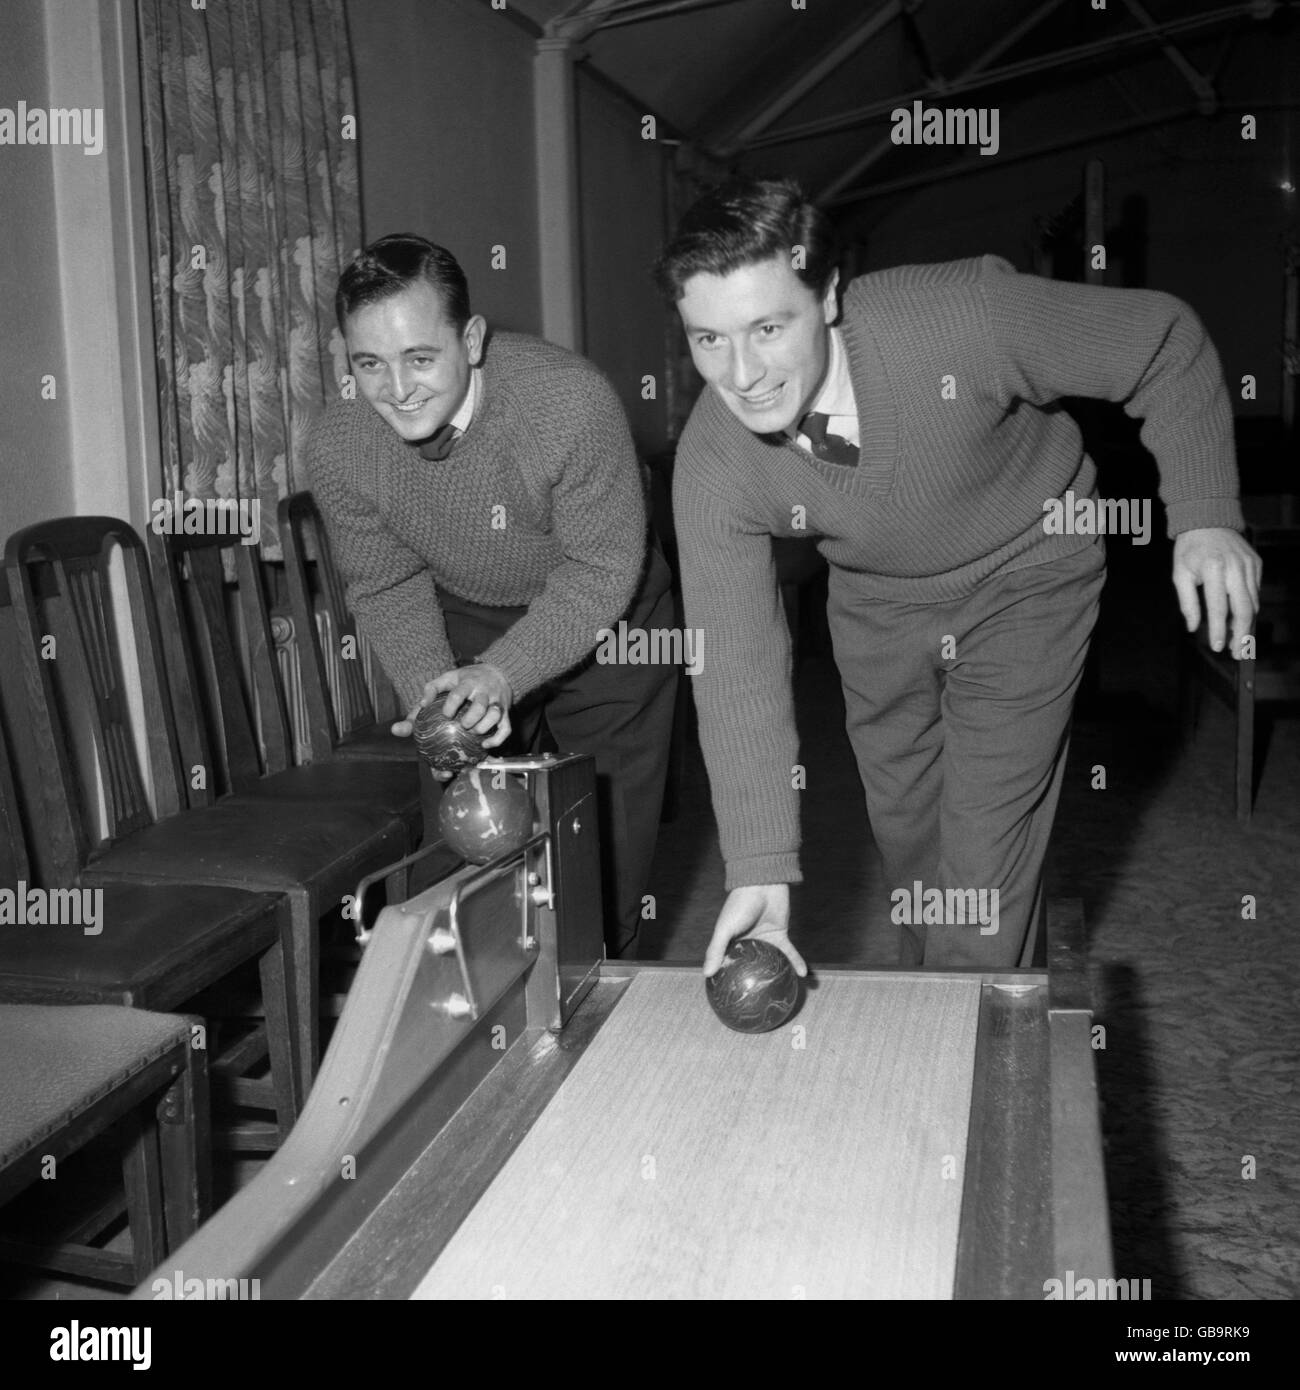 Soccer - Burnley FC - Blackpool Bowling Alley Stock Photo